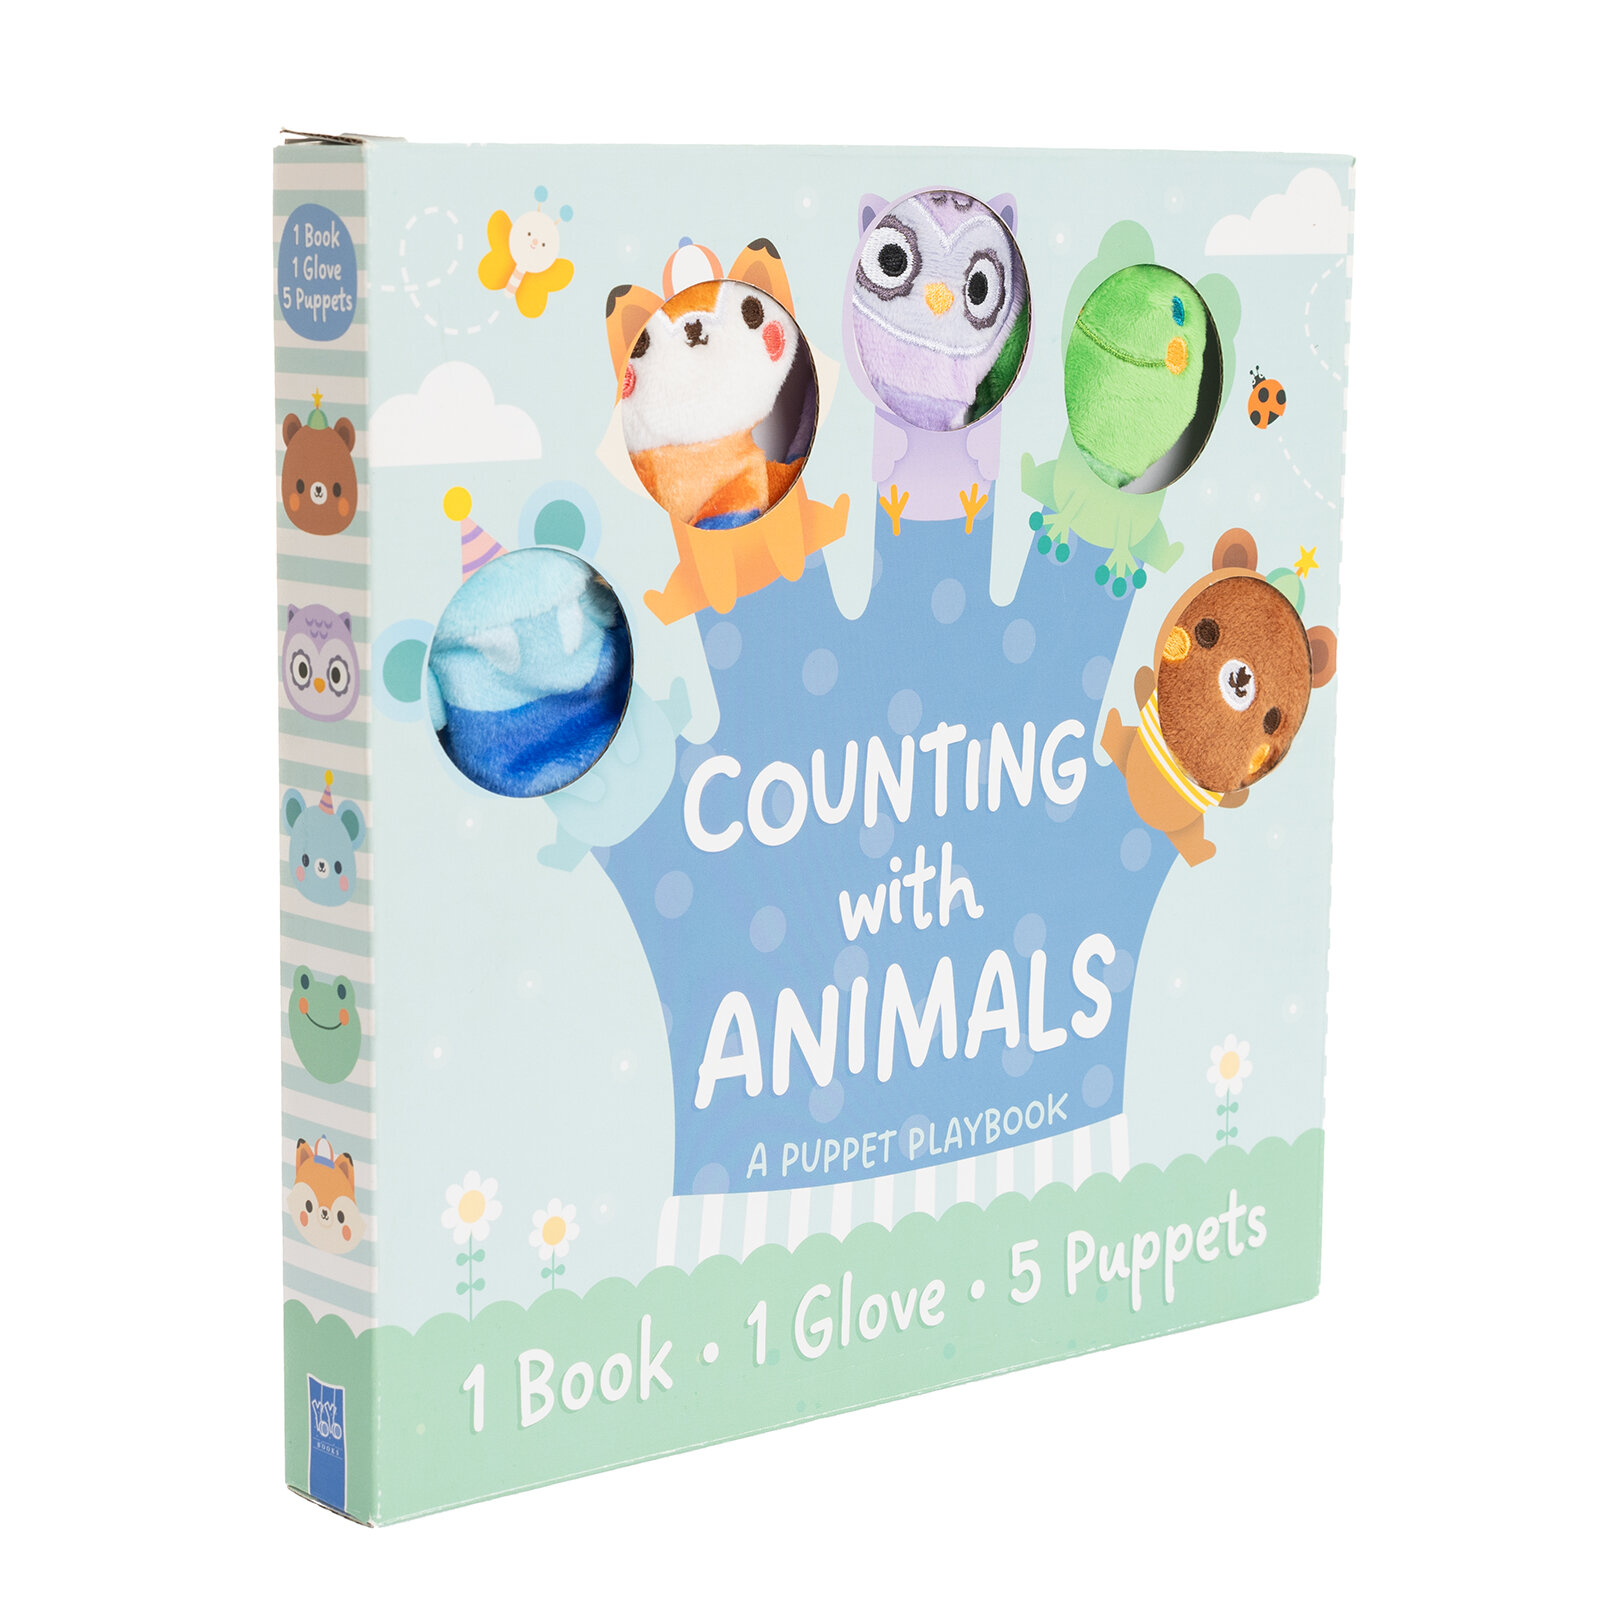 1 Book 1 Glove 5 Puppets: Counting with Animals